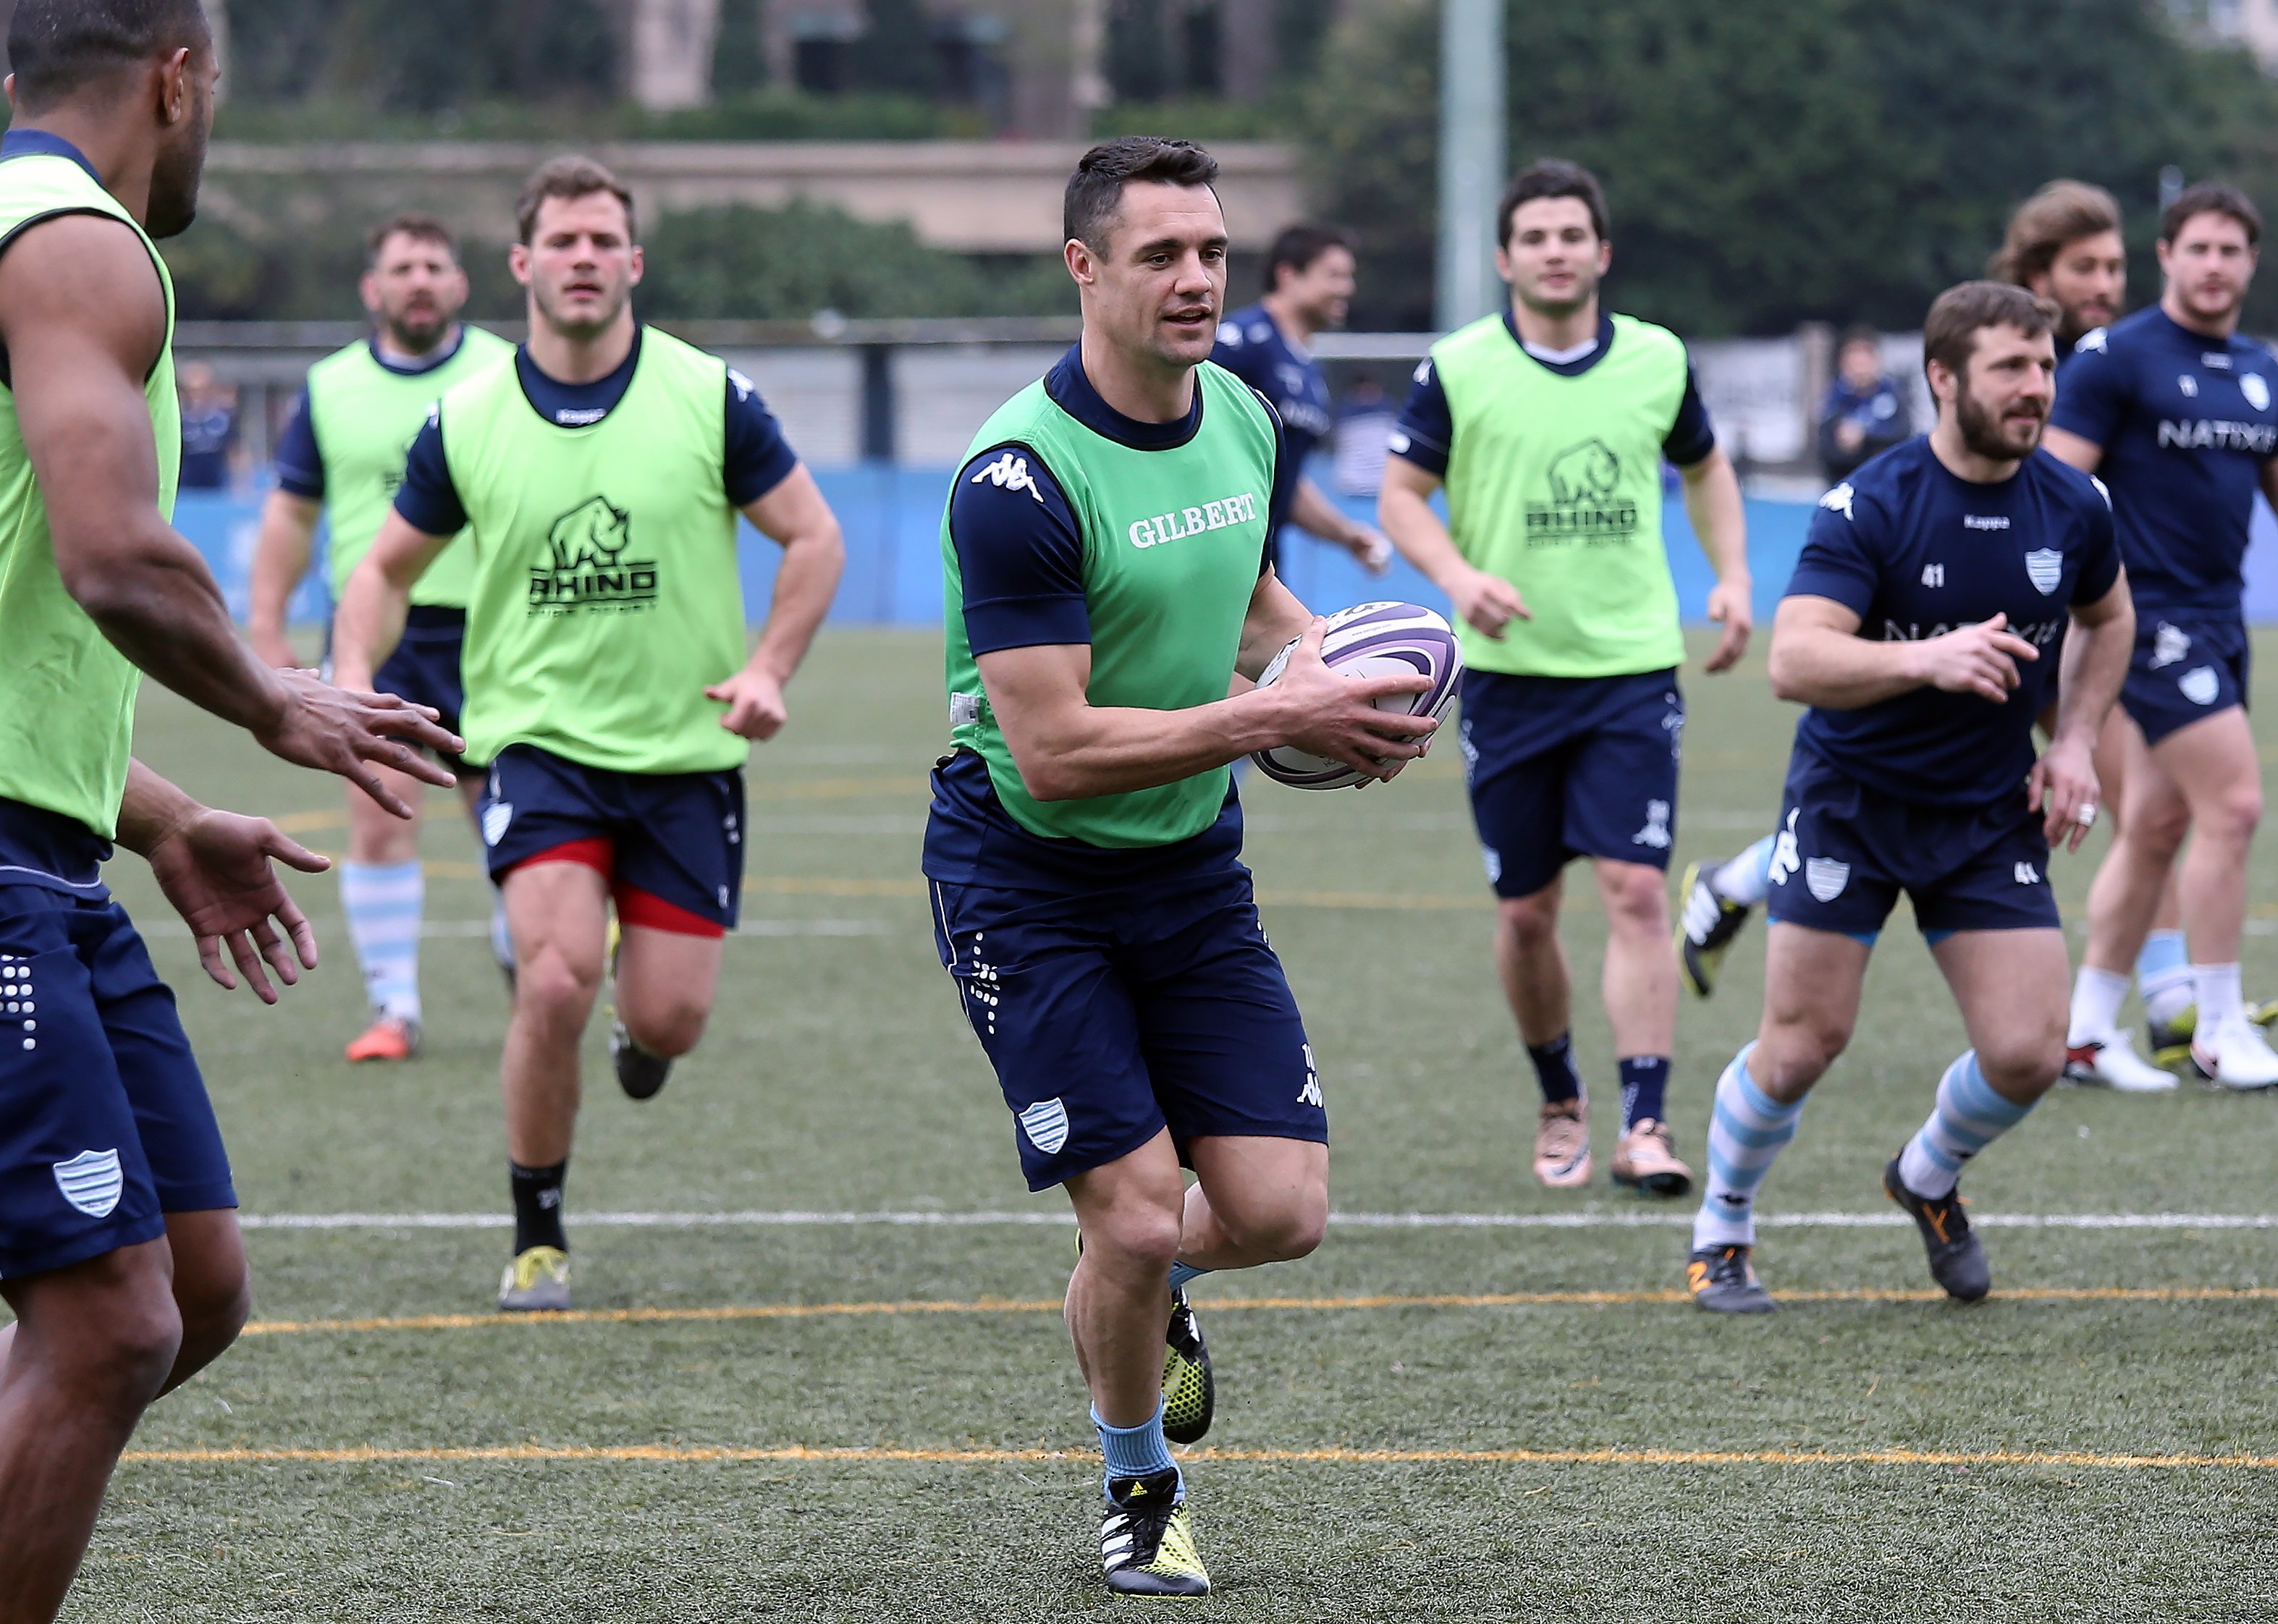 Dan Carter and his Racing 92 team-mates prepare for Saturday’s Natixis Cup clash against the Highlanders. Photos: Dickson Lee/SCMP